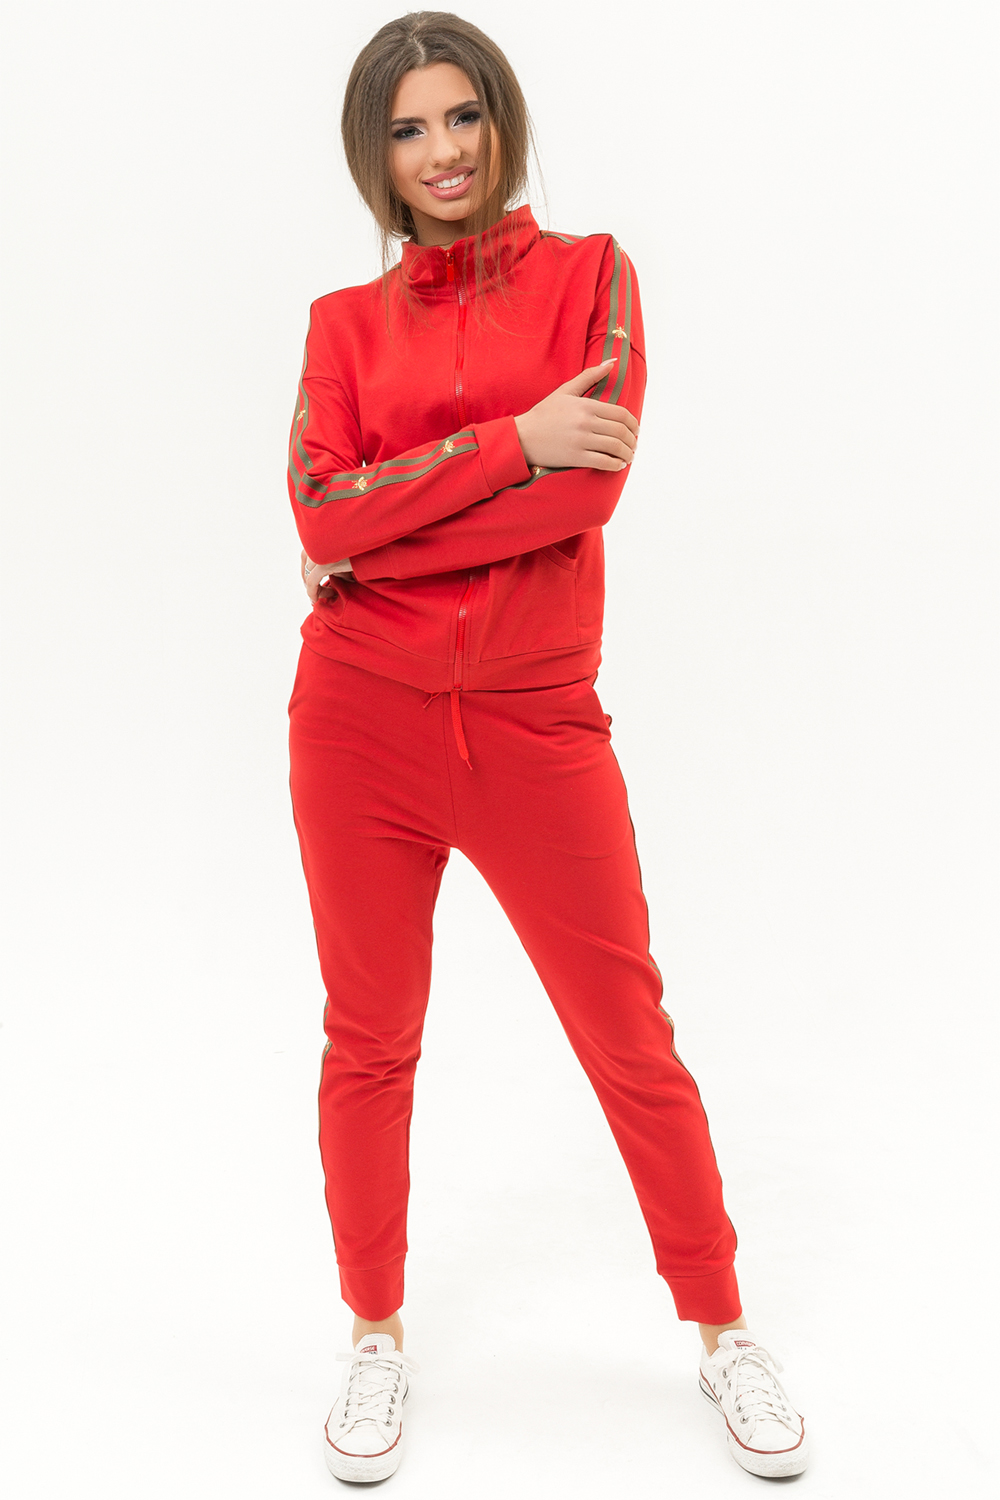 Red tracksuit